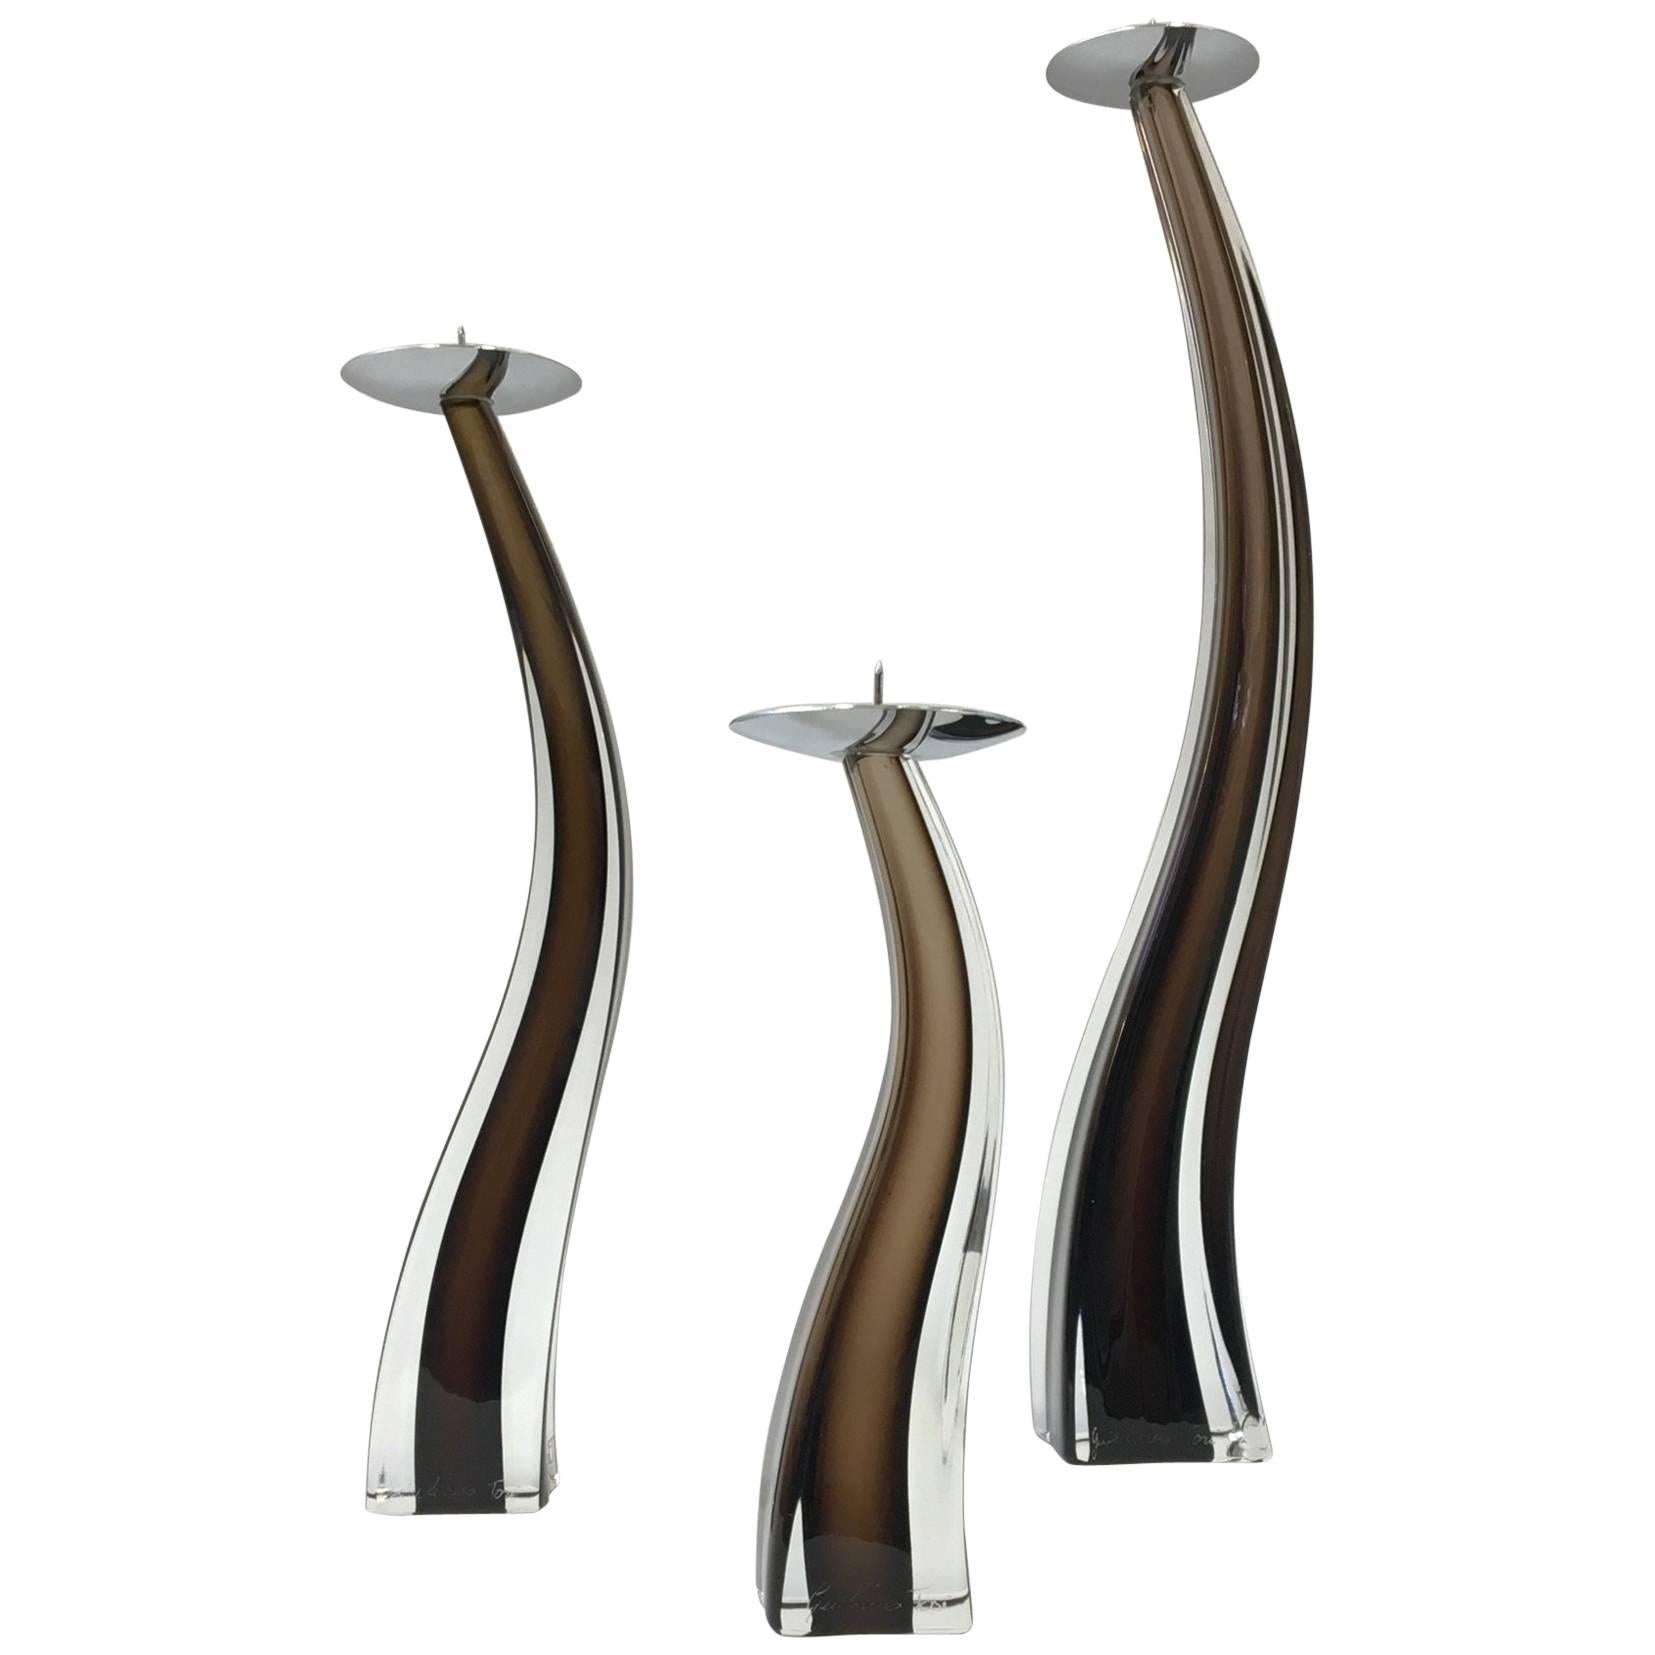 Set of Three Murano Glass Candlesticks by Giuliano Tosi for Oggetti, Italy